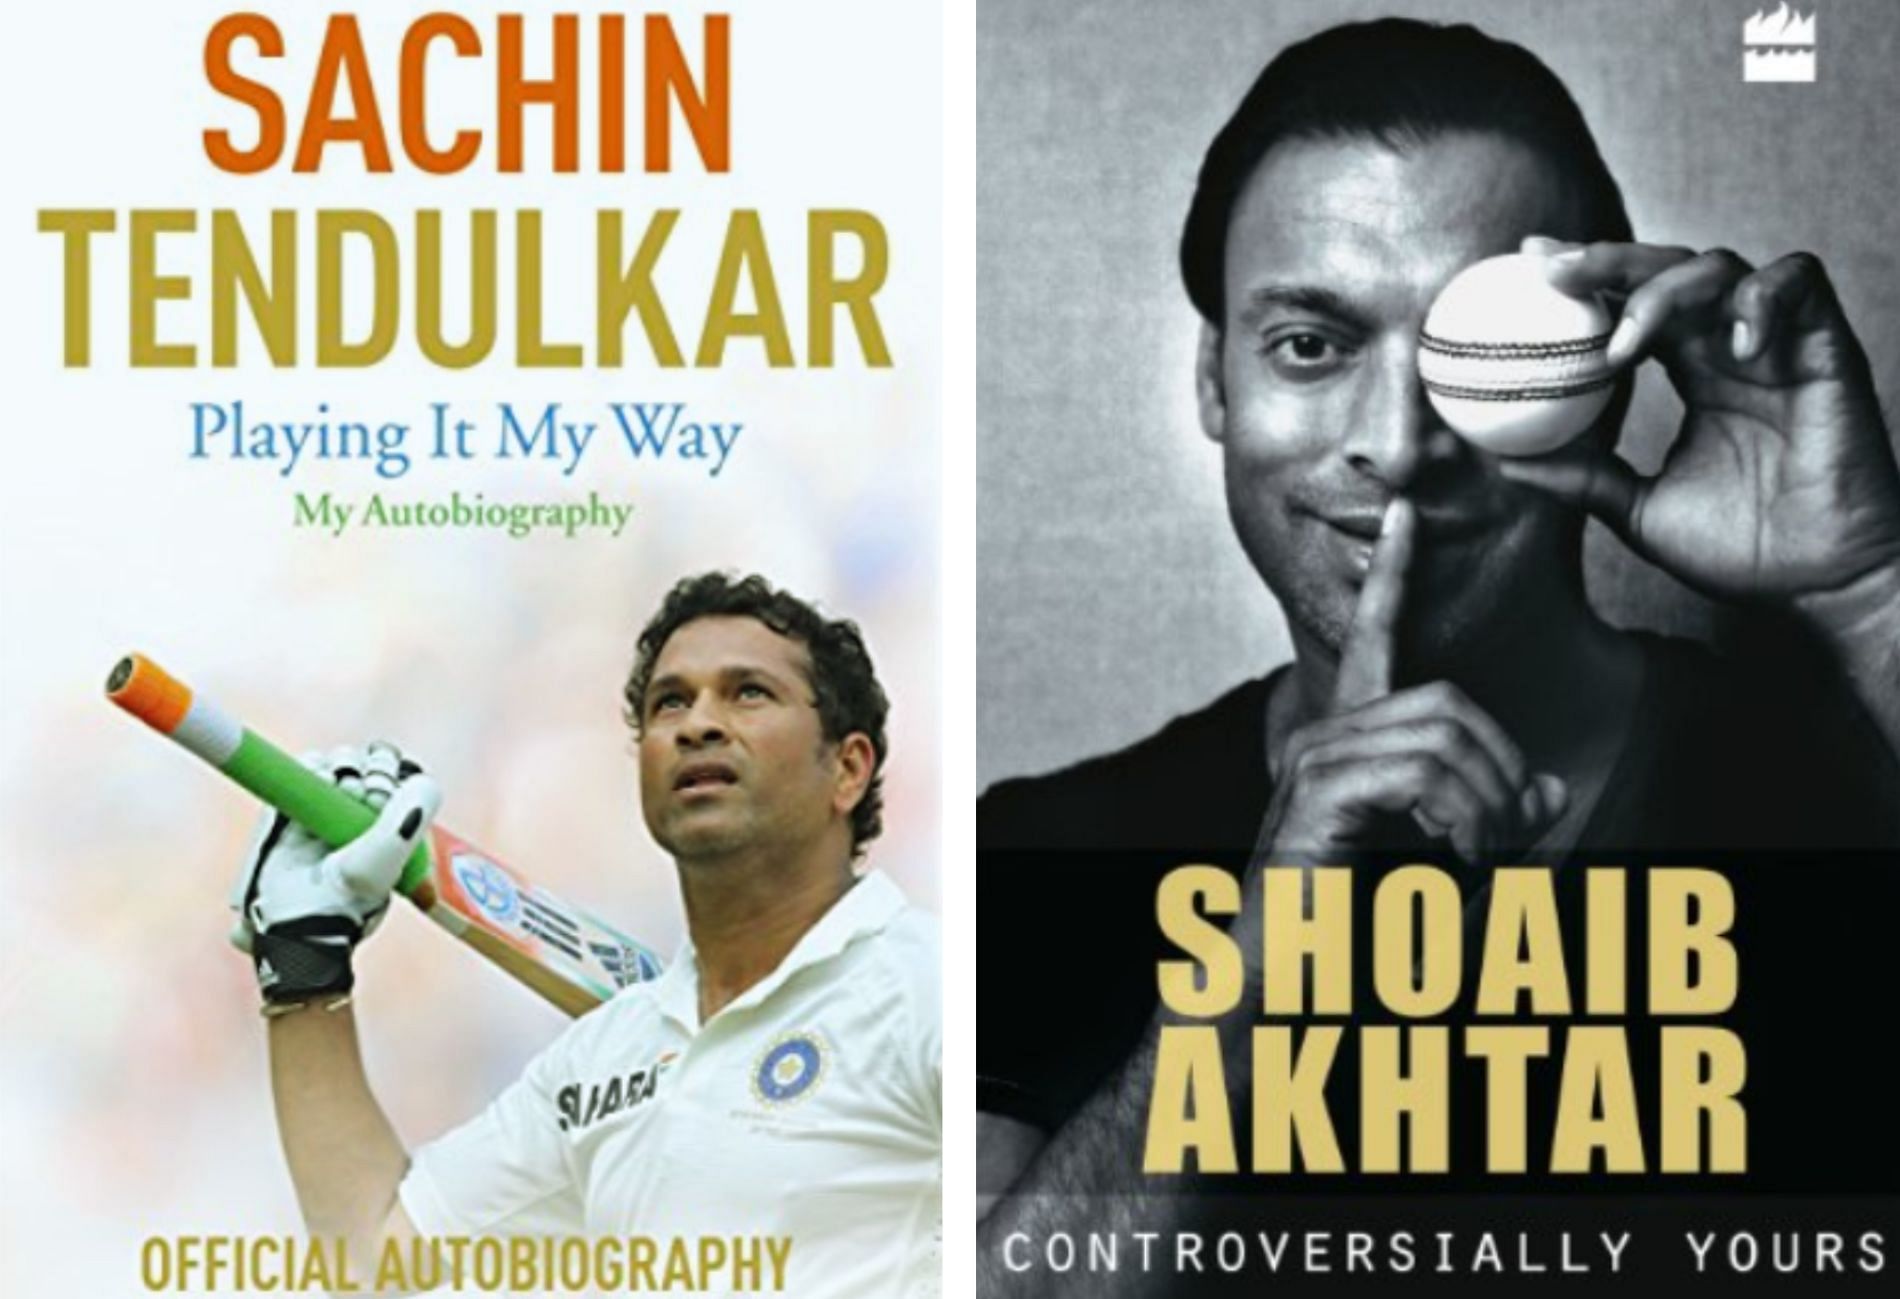 Book covers of former cricketers Sachin Tendulkar&#039;s (left) and Shoaib Akhtar&rsquo;s autobiographies. Credits: Amazon.in